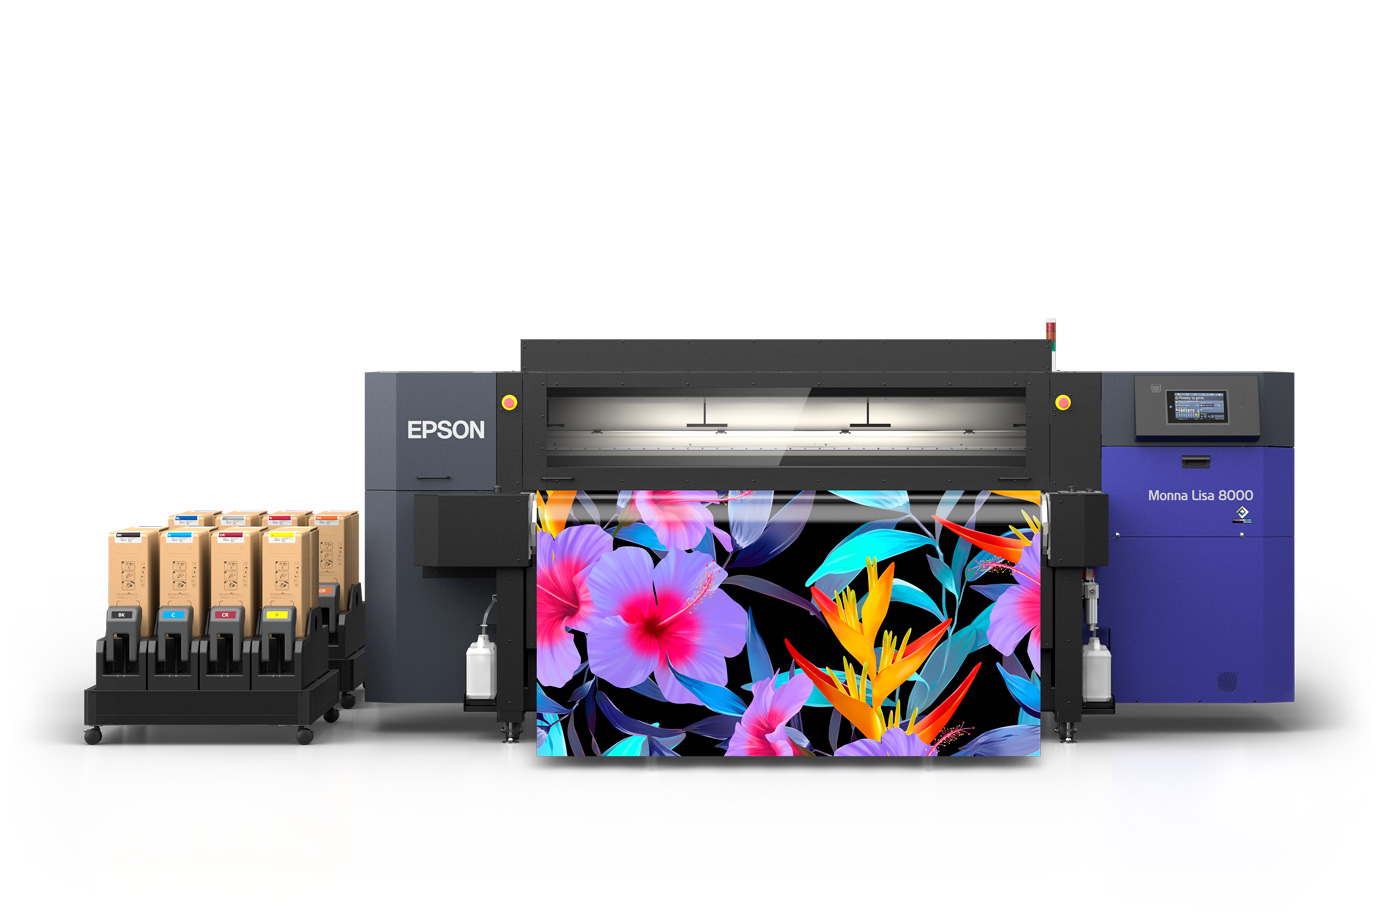 Epson ColorWorks C7500 | Support | Epson US